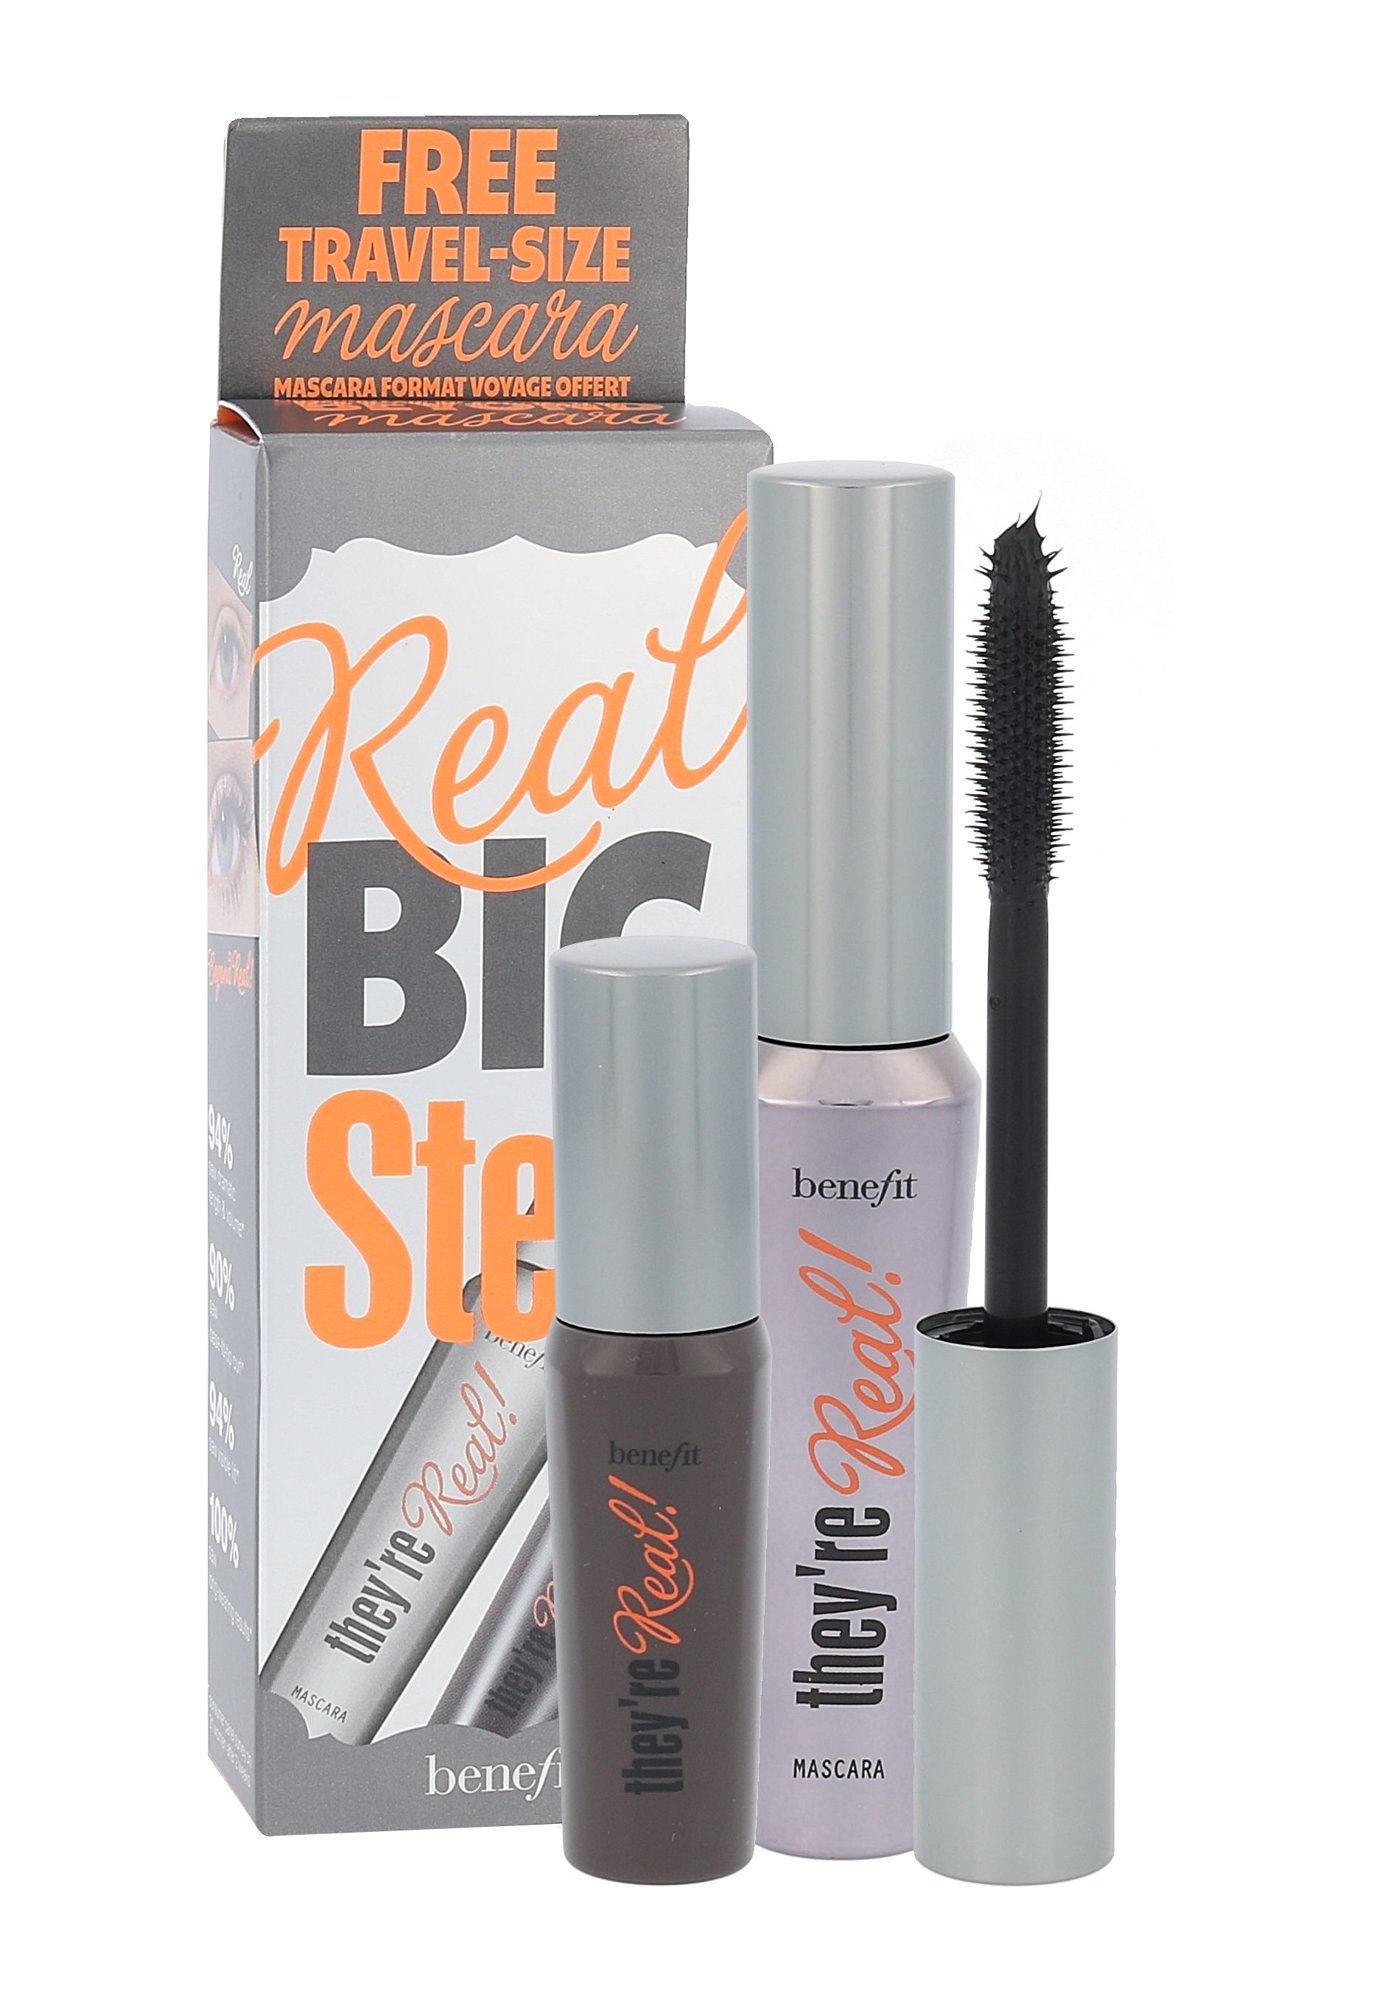 Benefit They´re Real! 8,5g Mascara They´re Real! 8,5 g + Mascara They´re Real! 4 g Black blakstienų tušas Rinkinys (Pažeista pakuotė)